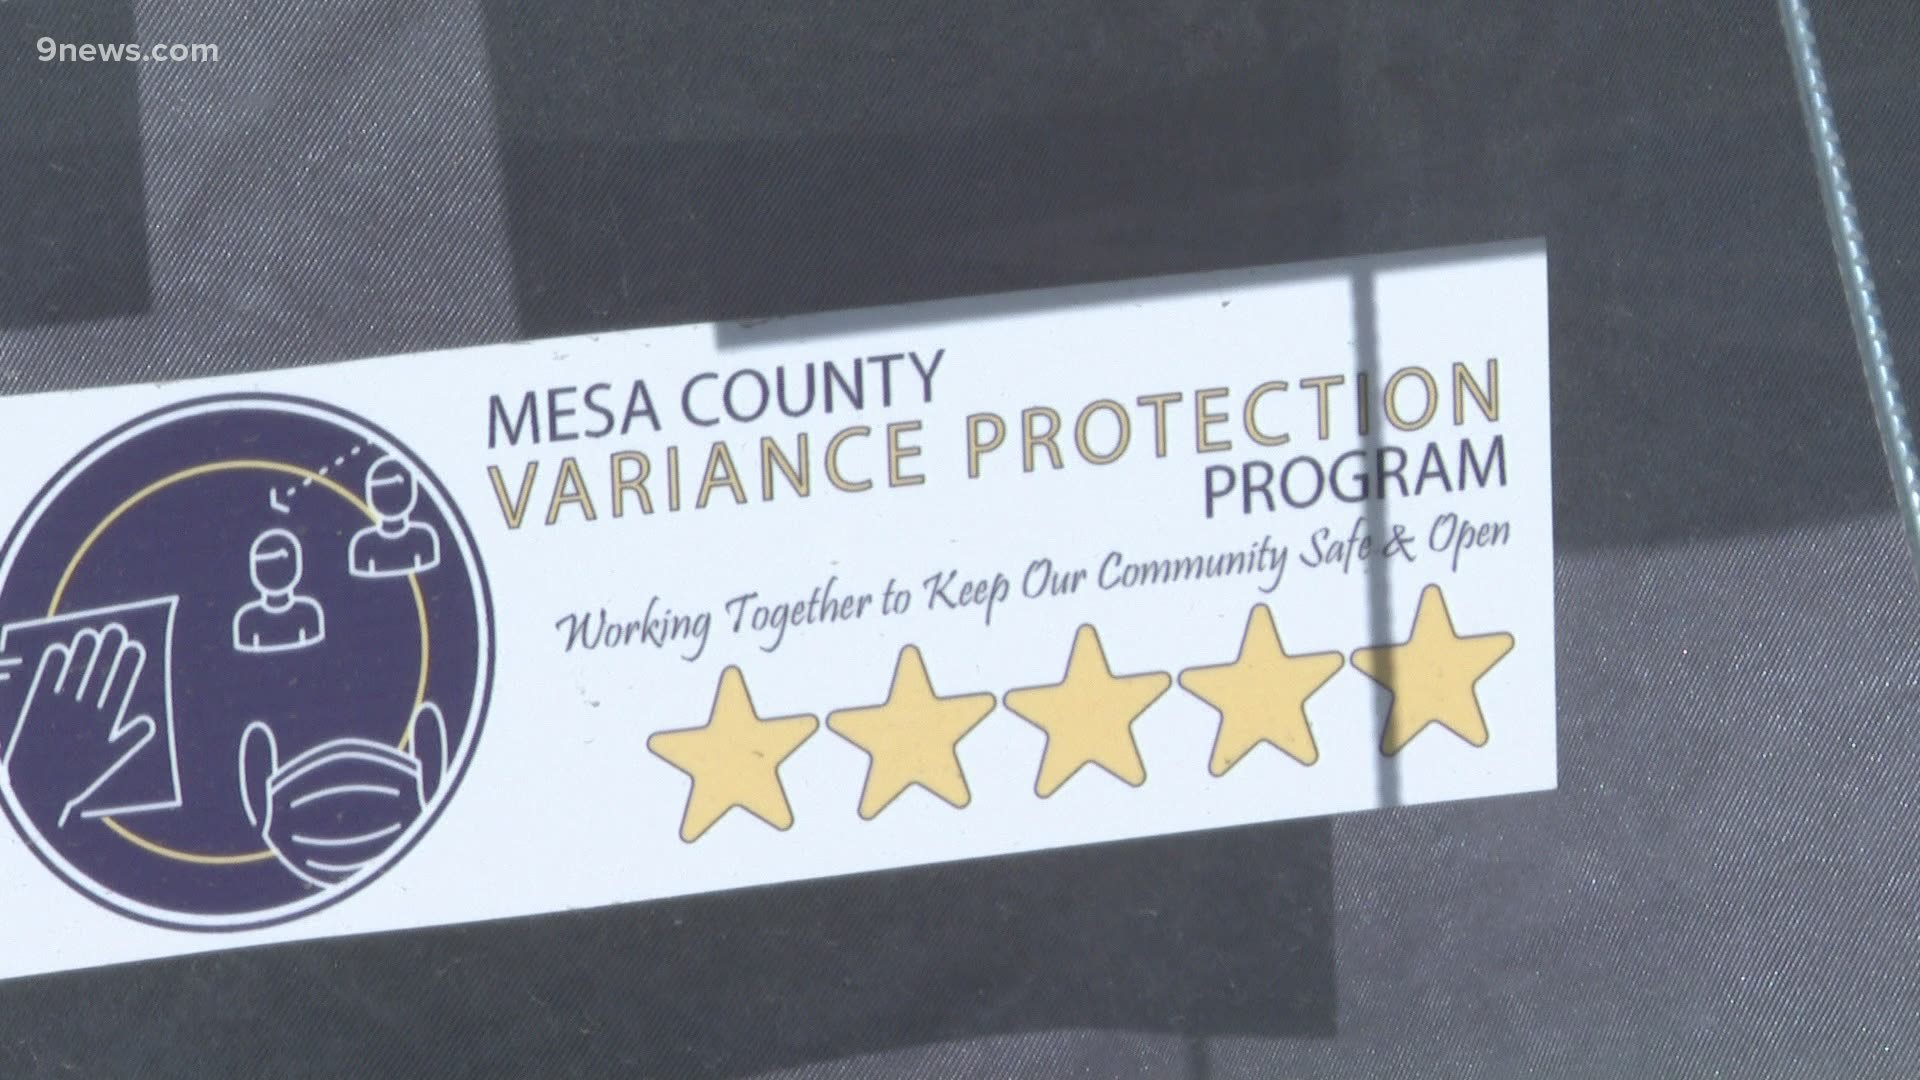 The program would be similar to Mesa County's Five Star program, which allows businesses to stay open if they've proved they can operate safely.